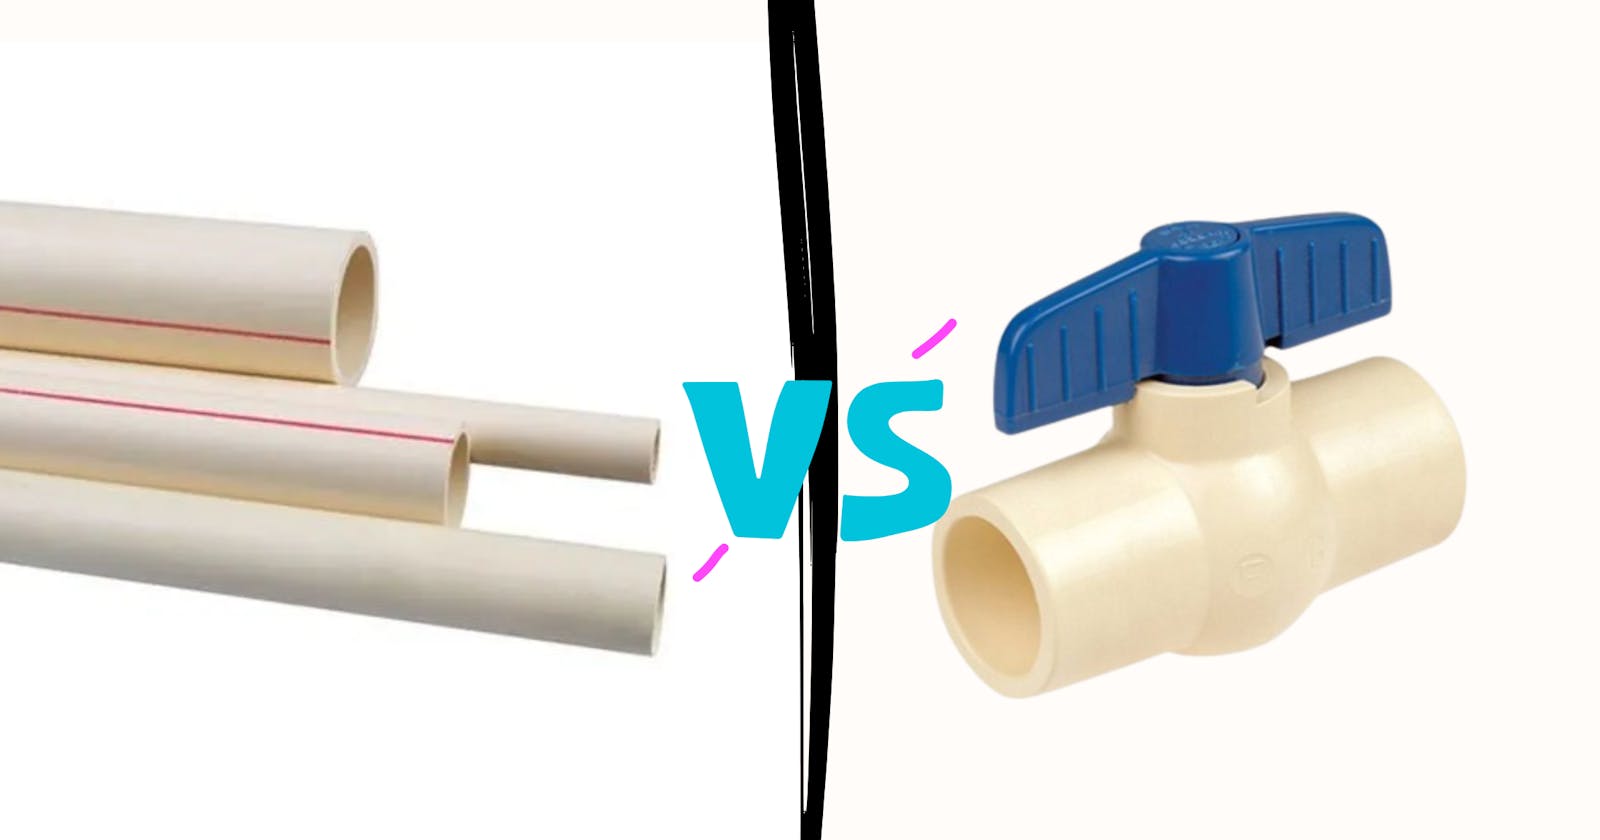 Difference Between CPVC Pipe Fittings & CPVC Ball Valve